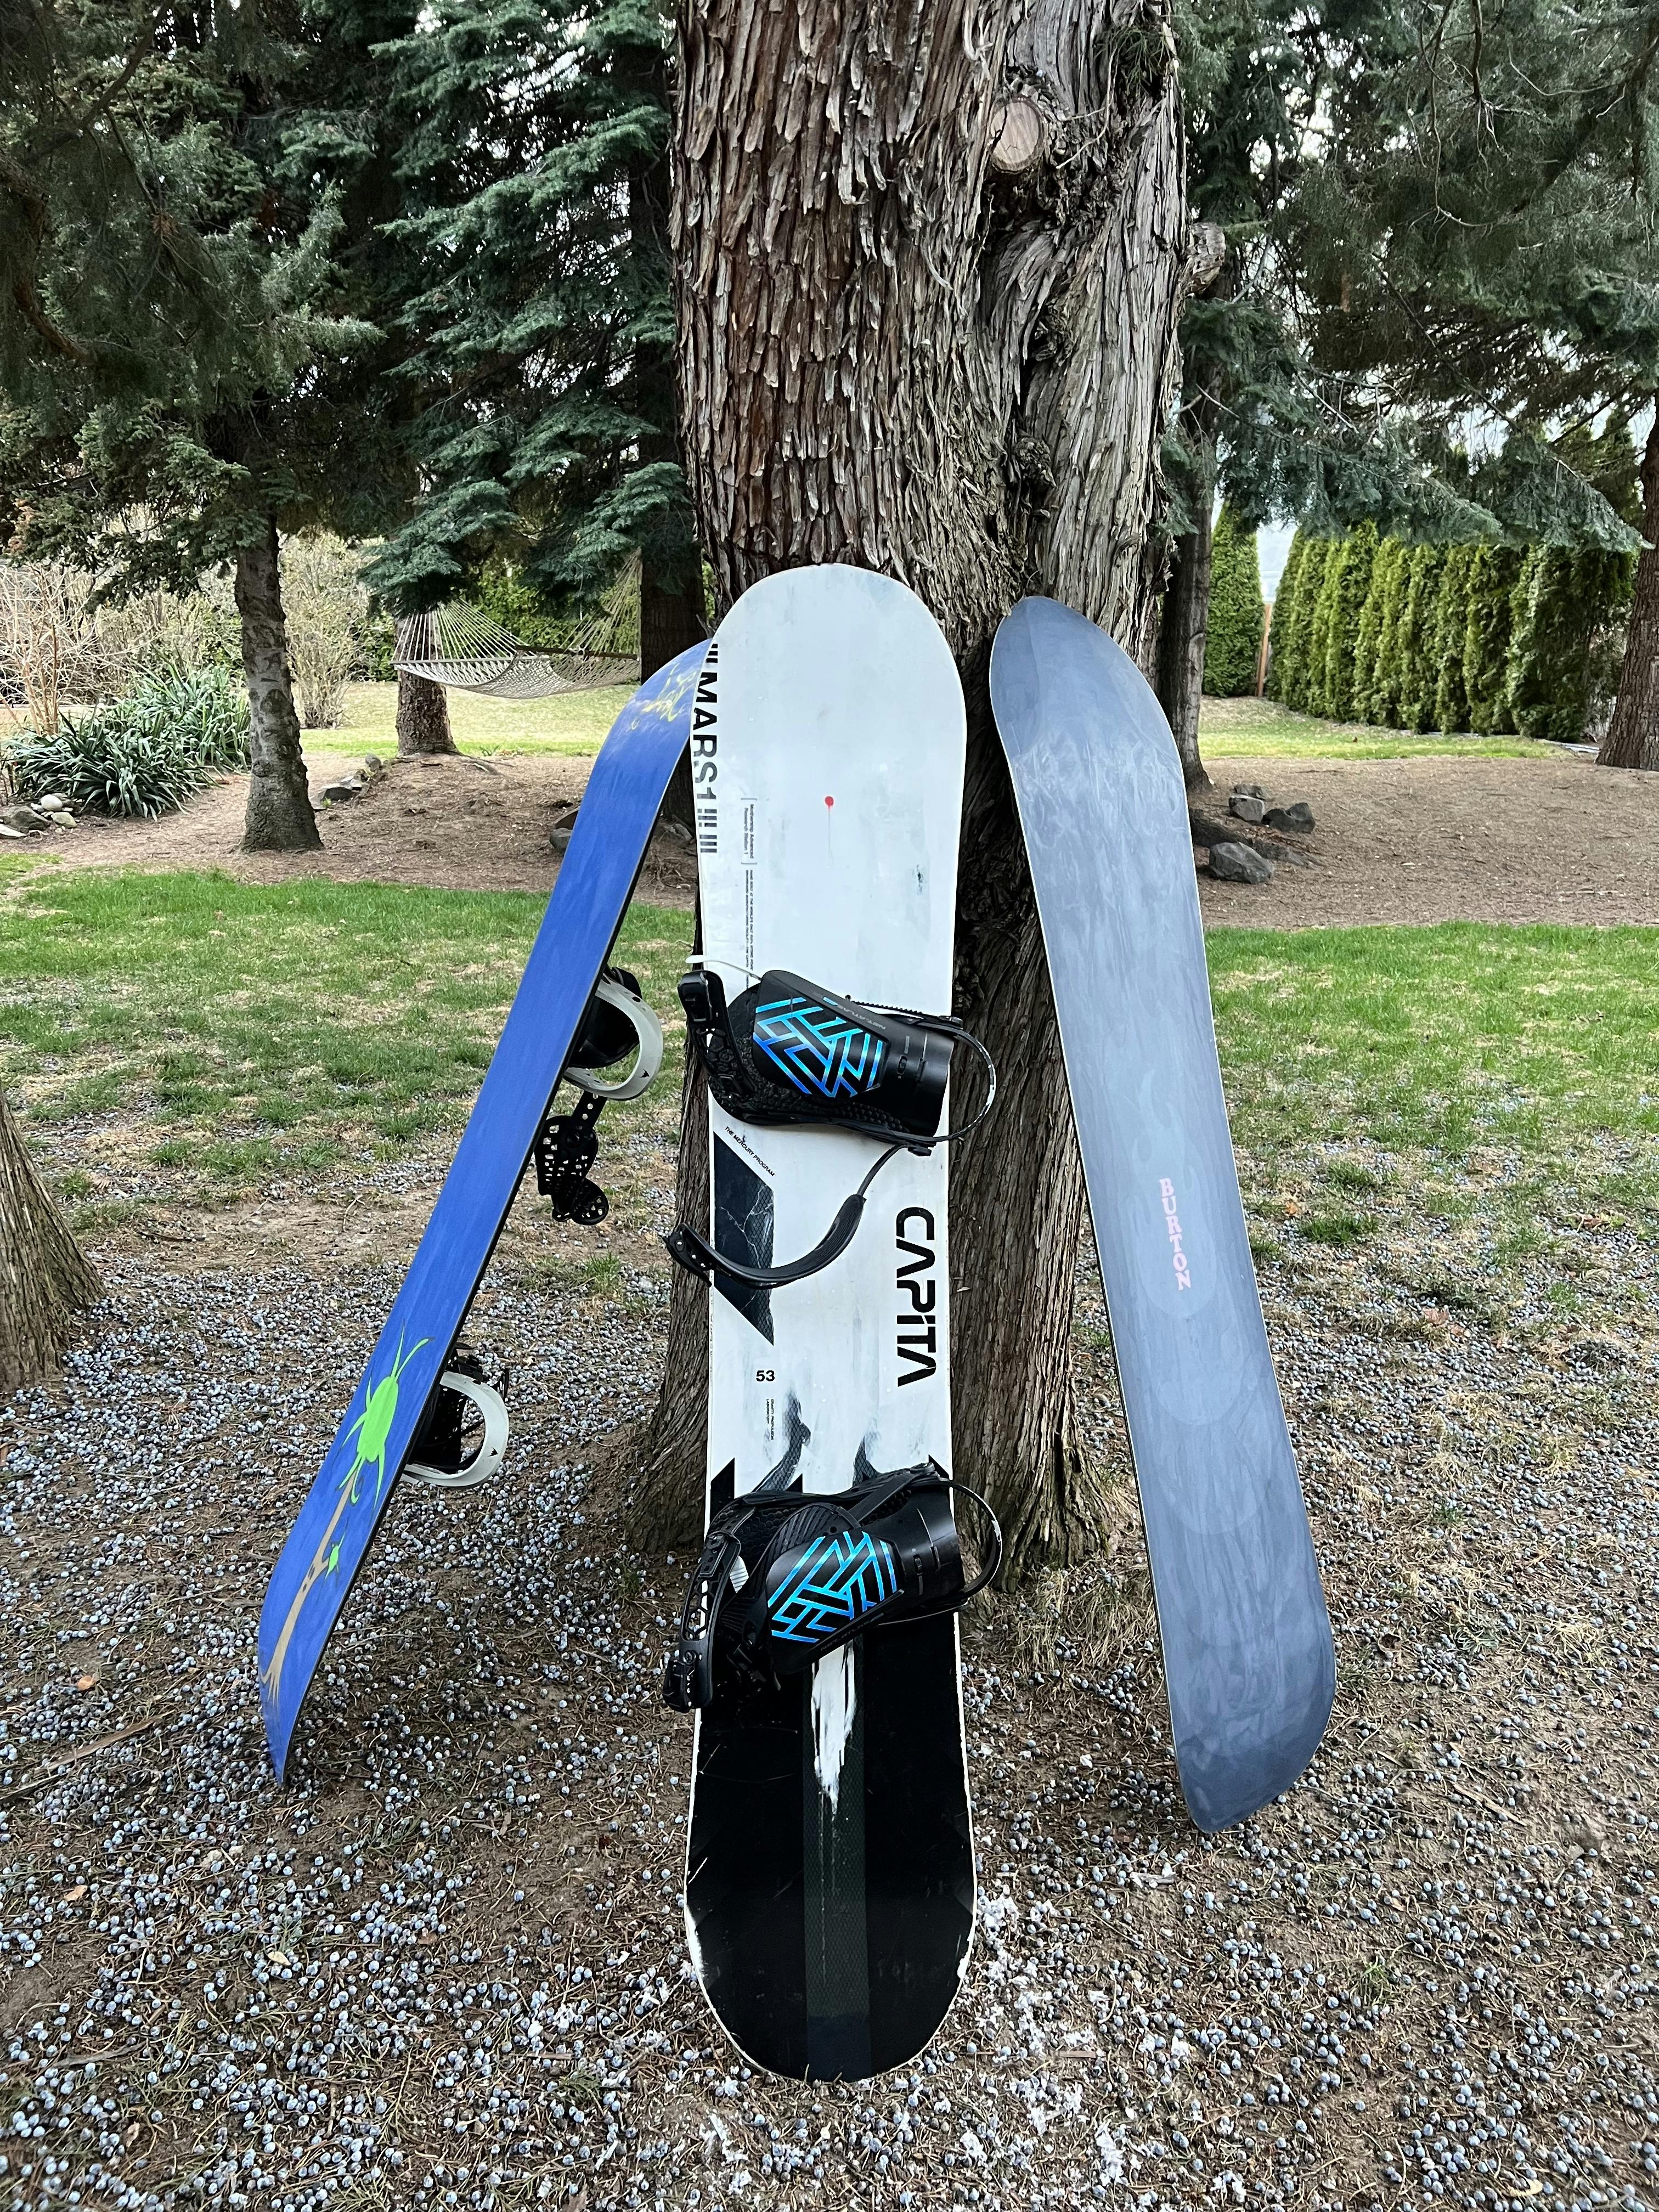 The Atlas Pro bindings on a CAPiTA Mercury board. Both are leaning against a tree.